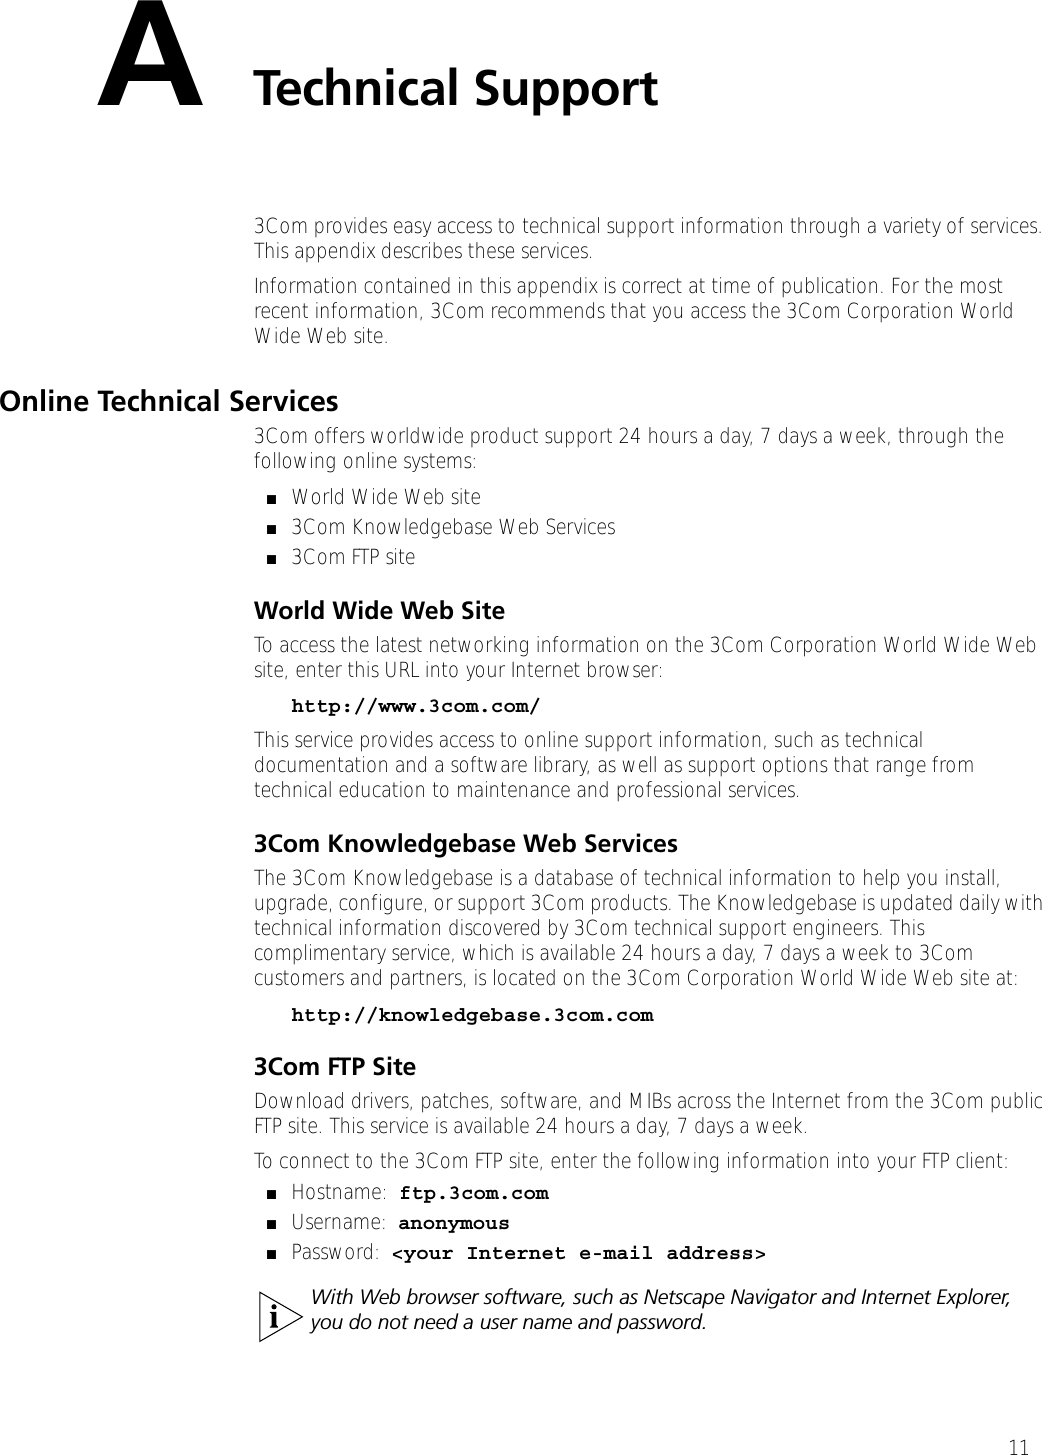 11ATechnical Support3Com provides easy access to technical support information through a variety of services. This appendix describes these services.Information contained in this appendix is correct at time of publication. For the most recent information, 3Com recommends that you access the 3Com Corporation World Wide Web site.Online Technical Services3Com offers worldwide product support 24 hours a day, 7 days a week, through the following online systems:■World Wide Web site■3Com Knowledgebase Web Services■3Com FTP siteWorld Wide Web SiteTo access the latest networking information on the 3Com Corporation World Wide Web site, enter this URL into your Internet browser:http://www.3com.com/This service provides access to online support information, such as technical documentation and a software library, as well as support options that range from technical education to maintenance and professional services.3Com Knowledgebase Web ServicesThe 3Com Knowledgebase is a database of technical information to help you install, upgrade, configure, or support 3Com products. The Knowledgebase is updated daily with technical information discovered by 3Com technical support engineers. This complimentary service, which is available 24 hours a day, 7 days a week to 3Com customers and partners, is located on the 3Com Corporation World Wide Web site at:http://knowledgebase.3com.com3Com FTP SiteDownload drivers, patches, software, and MIBs across the Internet from the 3Com public FTP site. This service is available 24 hours a day, 7 days a week.To connect to the 3Com FTP site, enter the following information into your FTP client:■Hostname: ftp.3com.com■Username: anonymous■Password: &lt;your Internet e-mail address&gt;With Web browser software, such as Netscape Navigator and Internet Explorer, you do not need a user name and password.